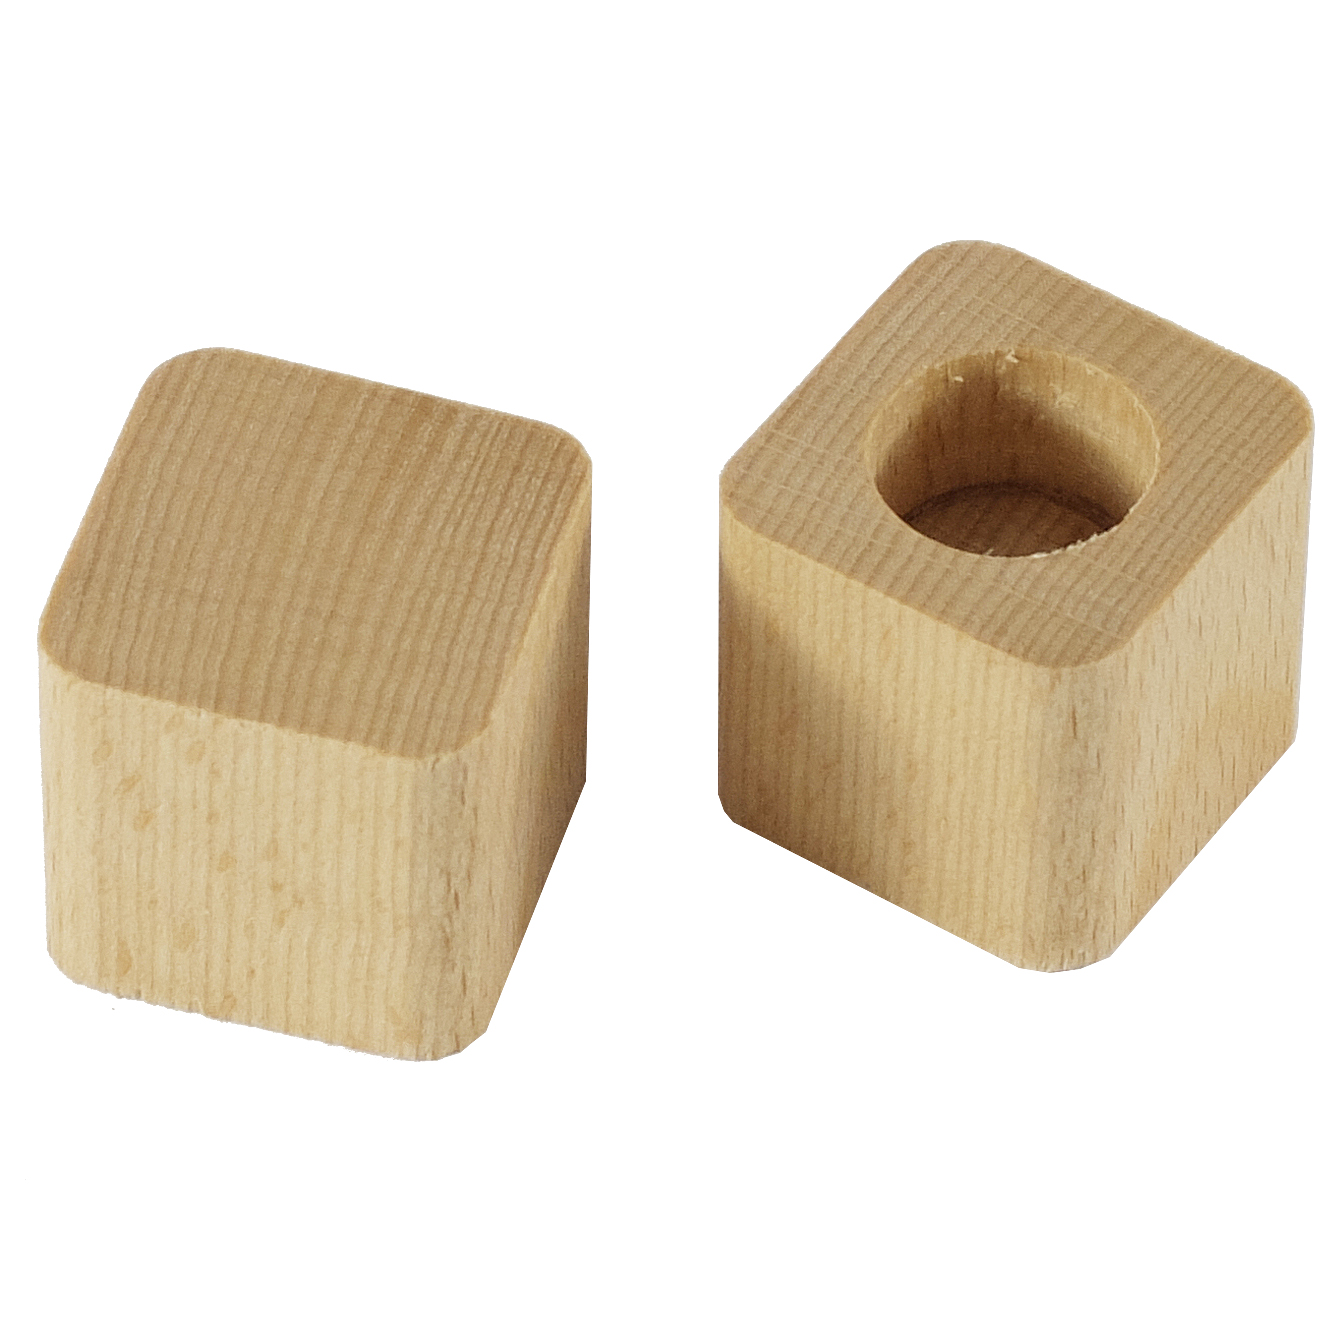 Wooden nuts